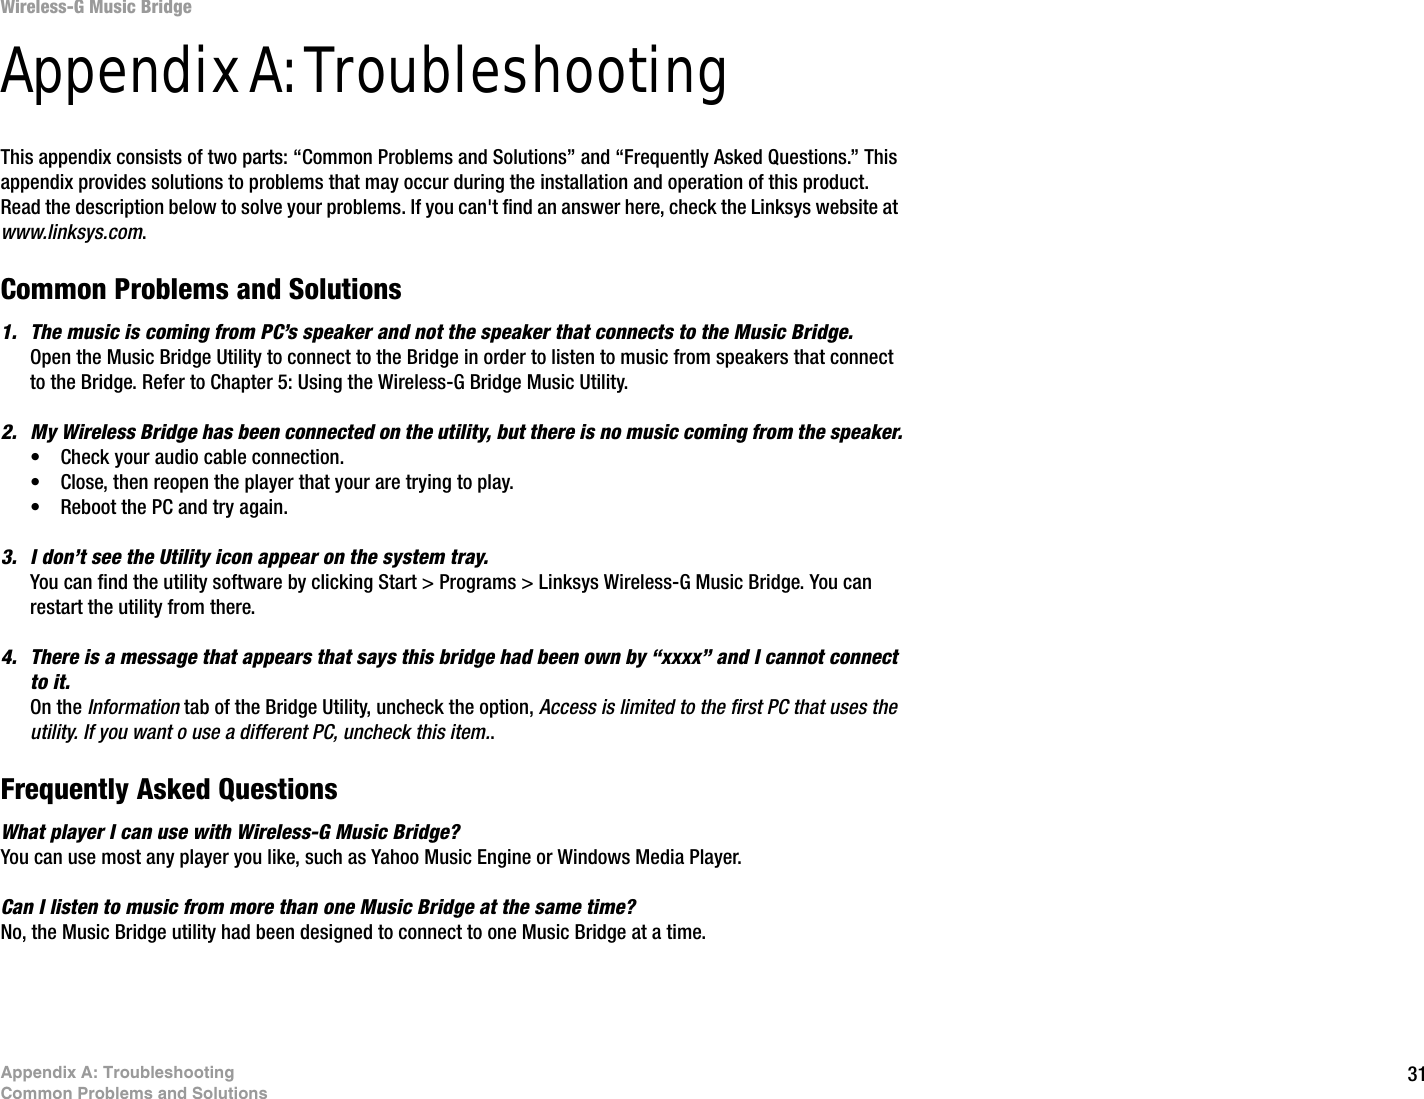 31Appendix A: TroubleshootingCommon Problems and SolutionsWireless-G Music BridgeAppendix A: TroubleshootingThis appendix consists of two parts: “Common Problems and Solutions” and “Frequently Asked Questions.” This appendix provides solutions to problems that may occur during the installation and operation of this product. Read the description below to solve your problems. If you can&apos;t find an answer here, check the Linksys website at www.linksys.com.Common Problems and Solutions1. The music is coming from PC’s speaker and not the speaker that connects to the Music Bridge.Open the Music Bridge Utility to connect to the Bridge in order to listen to music from speakers that connect to the Bridge. Refer to Chapter 5: Using the Wireless-G Bridge Music Utility.2. My Wireless Bridge has been connected on the utility, but there is no music coming from the speaker.• Check your audio cable connection.• Close, then reopen the player that your are trying to play.• Reboot the PC and try again.3. I don’t see the Utility icon appear on the system tray.You can find the utility software by clicking Start &gt; Programs &gt; Linksys Wireless-G Music Bridge. You can restart the utility from there.4. There is a message that appears that says this bridge had been own by “xxxx” and I cannot connect to it. On the Information tab of the Bridge Utility, uncheck the option, Access is limited to the first PC that uses the utility. If you want o use a different PC, uncheck this item..Frequently Asked QuestionsWhat player I can use with Wireless-G Music Bridge?You can use most any player you like, such as Yahoo Music Engine or Windows Media Player.Can I listen to music from more than one Music Bridge at the same time?No, the Music Bridge utility had been designed to connect to one Music Bridge at a time. 